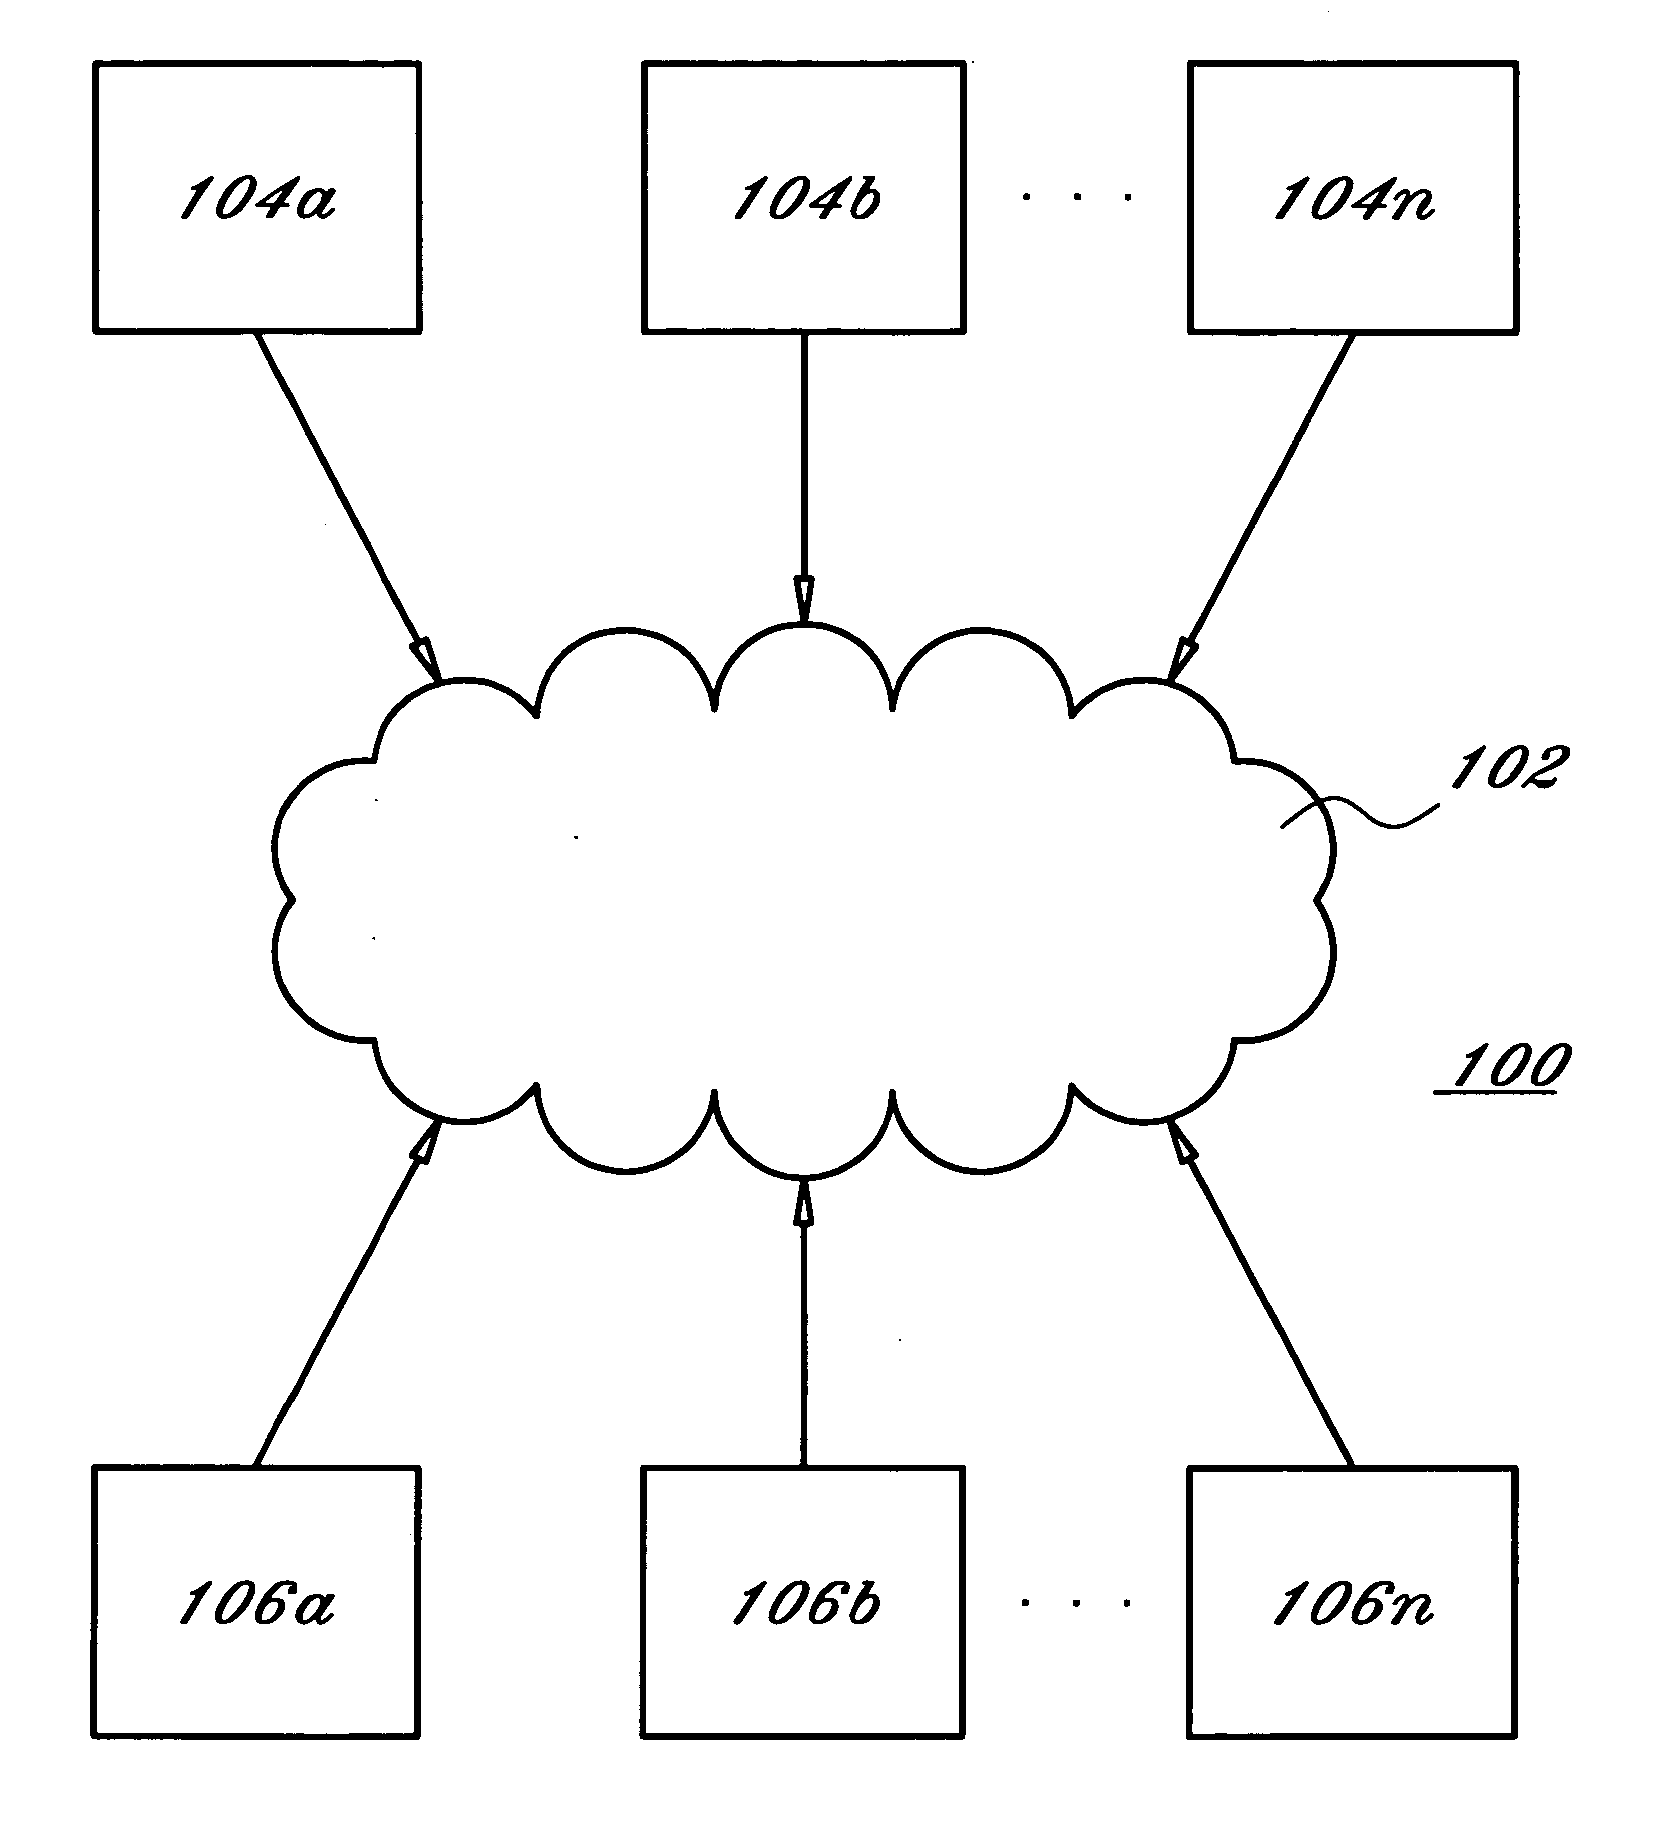 Service aggregation in cluster monitoring system with content-based event routing